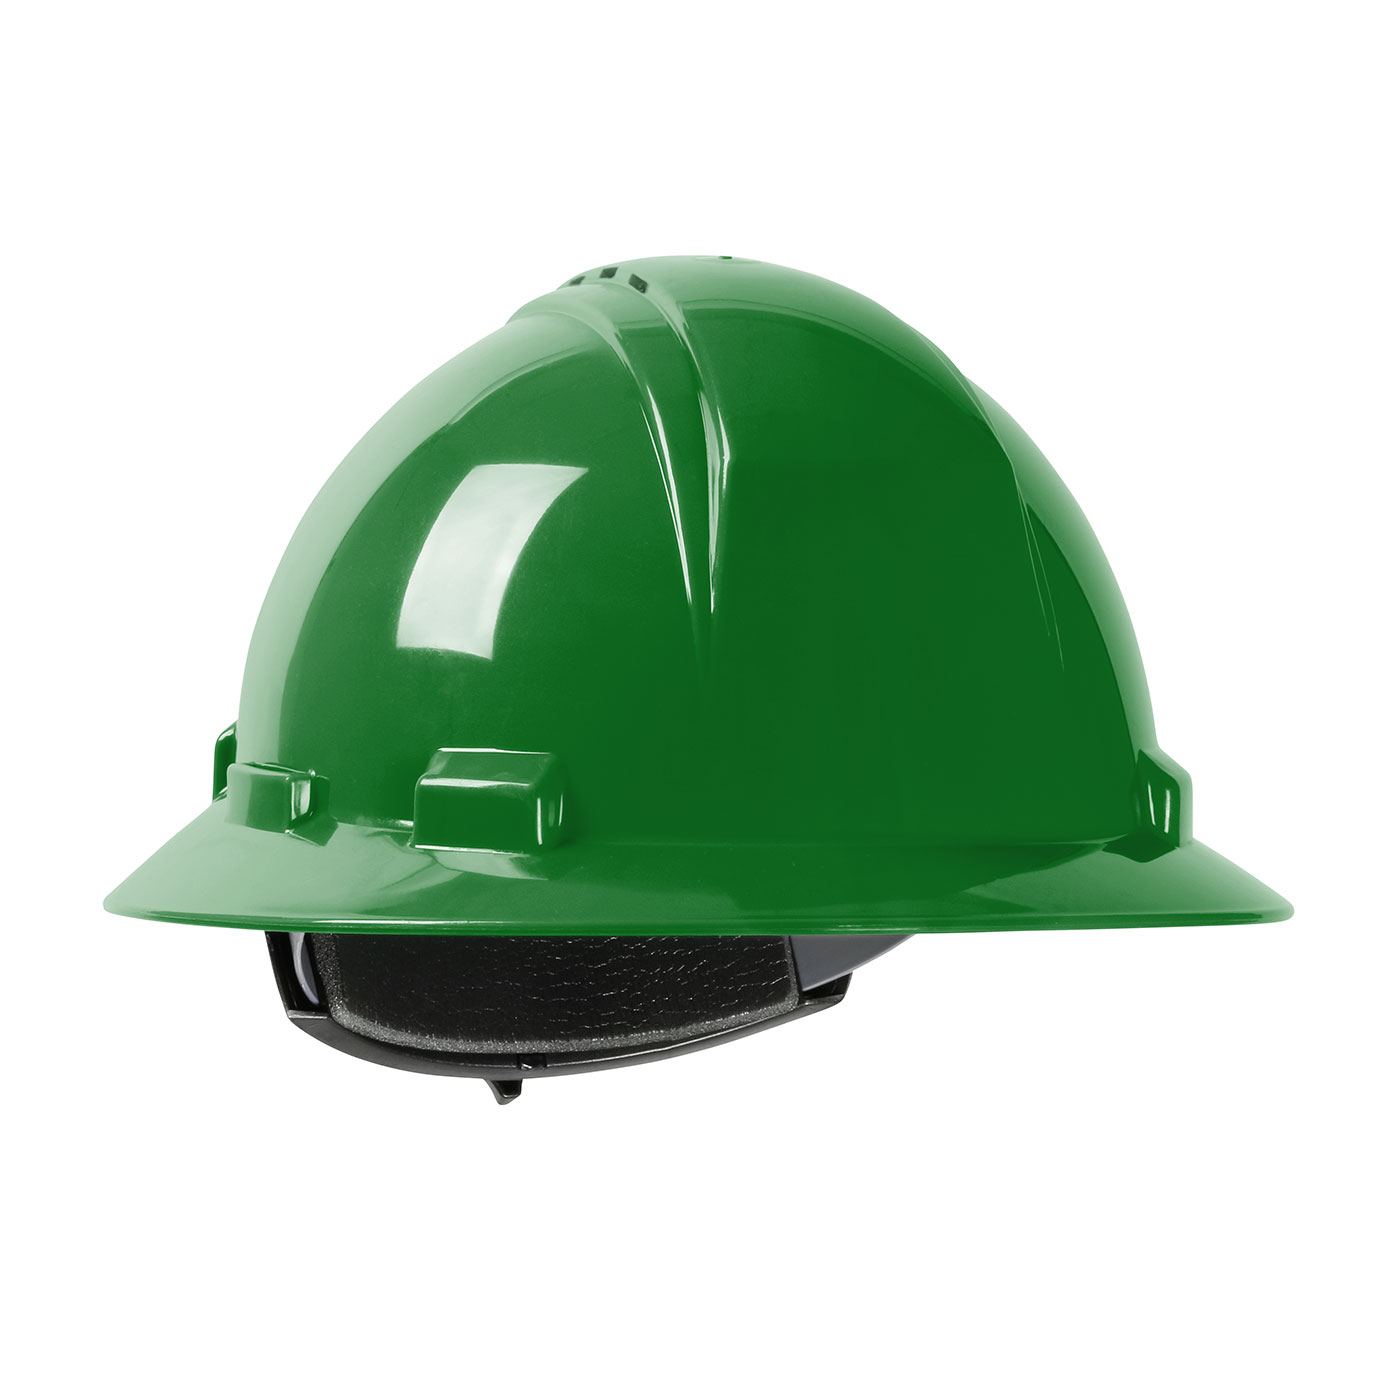 280-HP261RV PIP® Dynamic Kilimanjaro™ Vented Full Brim Hard Hat with HDPE Shell, 4-Point Textile Suspension and Wheel Ratchet Adjustment - Green